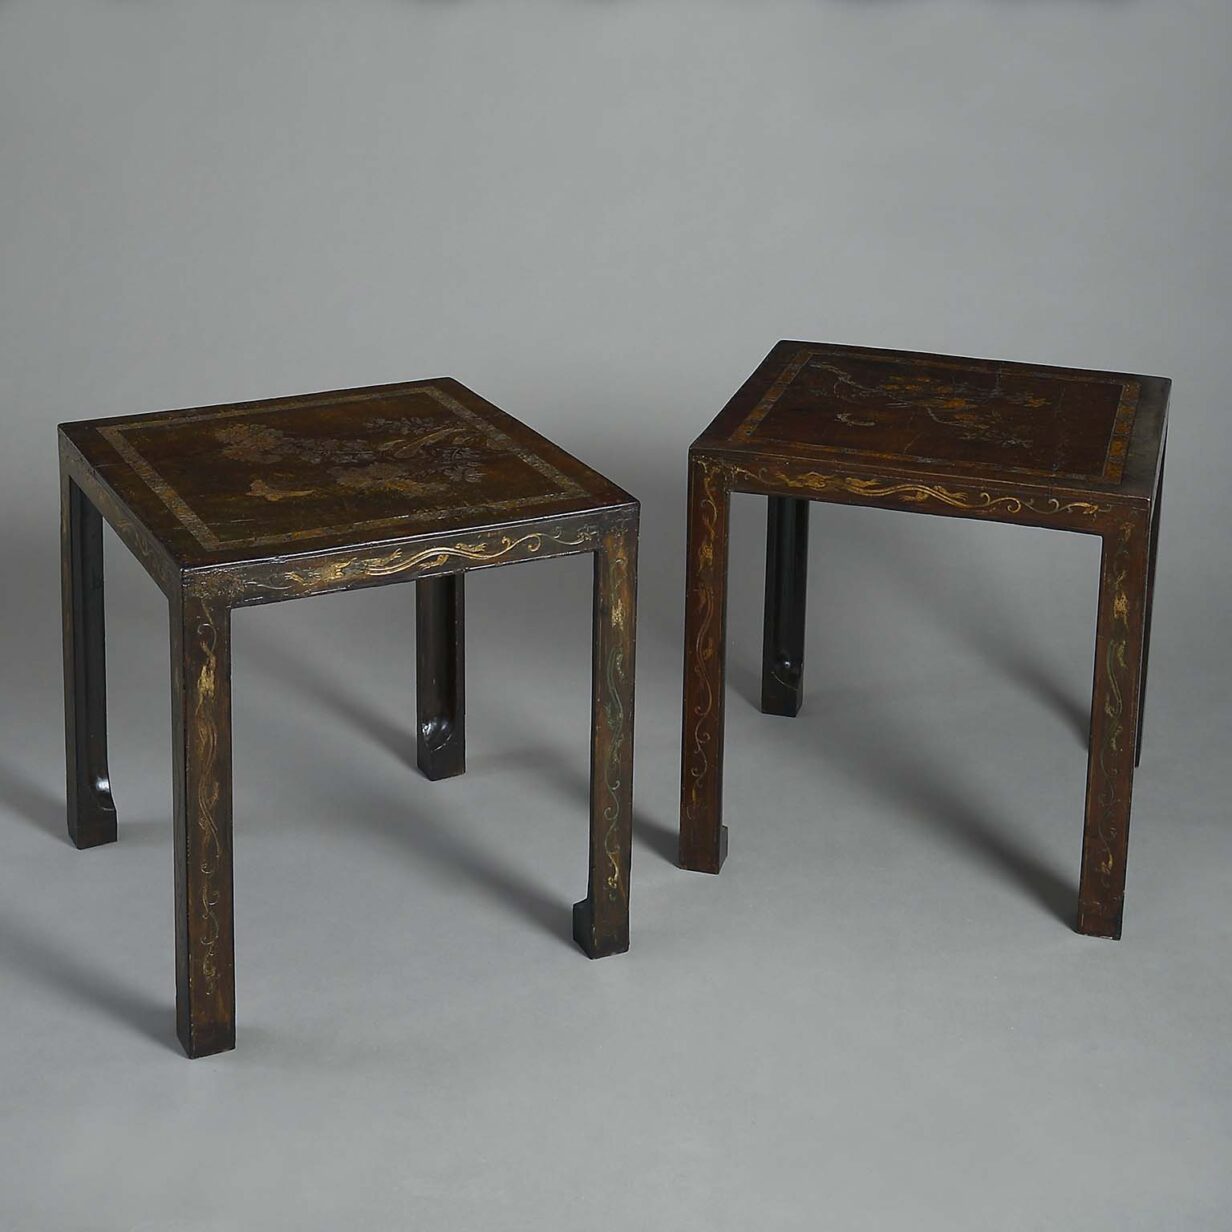 Pair of lacquer low tables